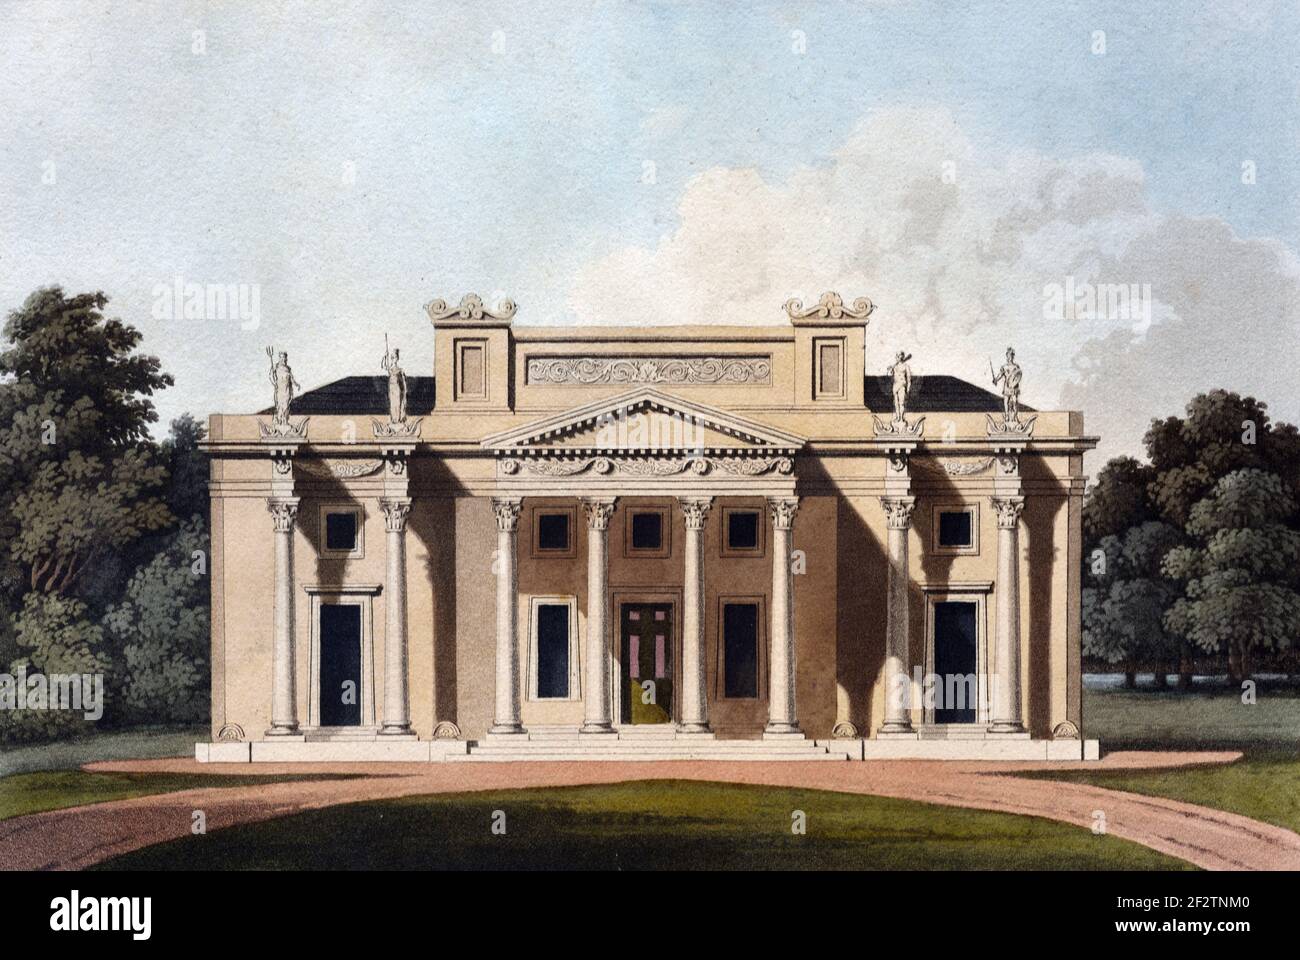 Neoclassical or Classical Corinthian Villa, Family House or English Country House (1827) Vintage Architectural Drawing, Aquatint or Engraving by James Thomson (1827) Stock Photo